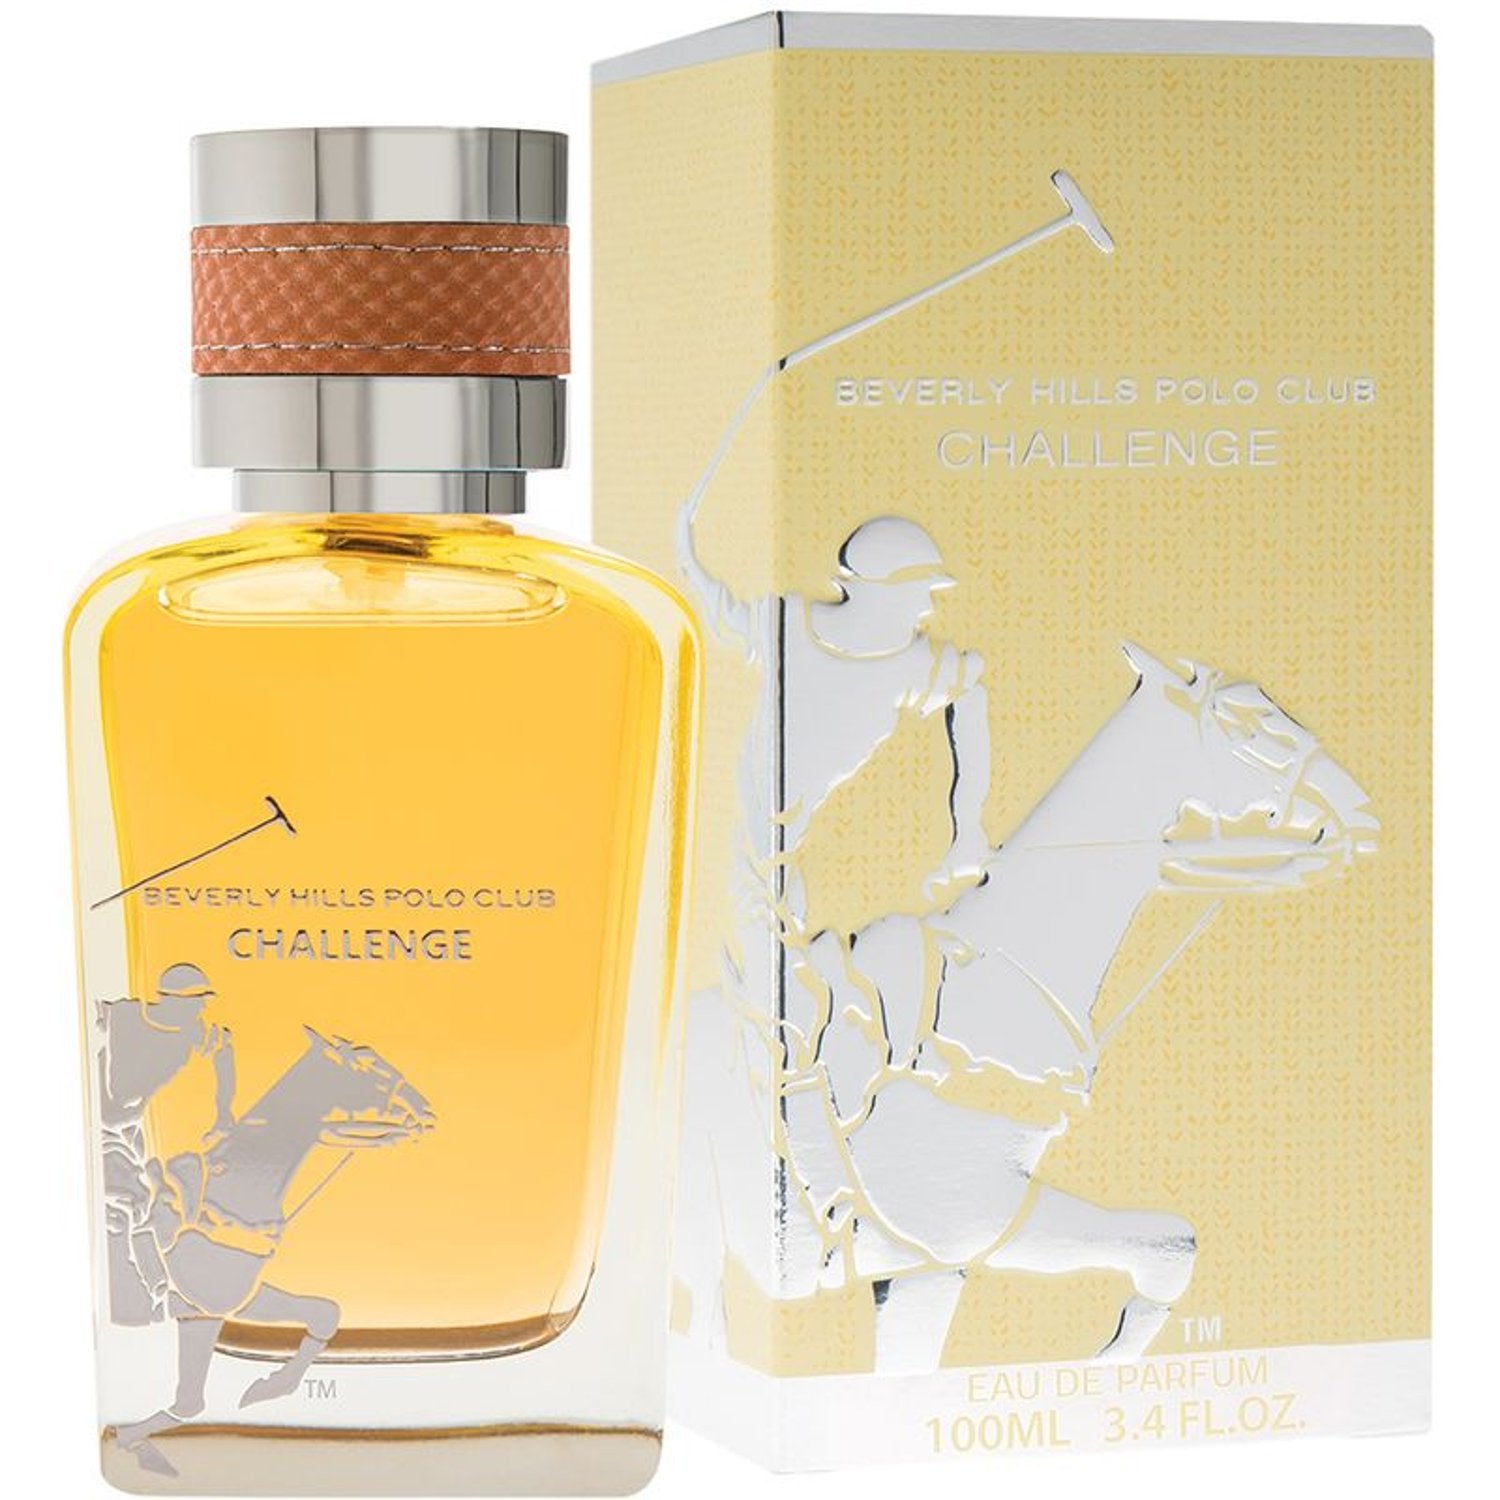 Beverly Hills Polo Club Challenge Perfume Online in Bahrain - Halabh